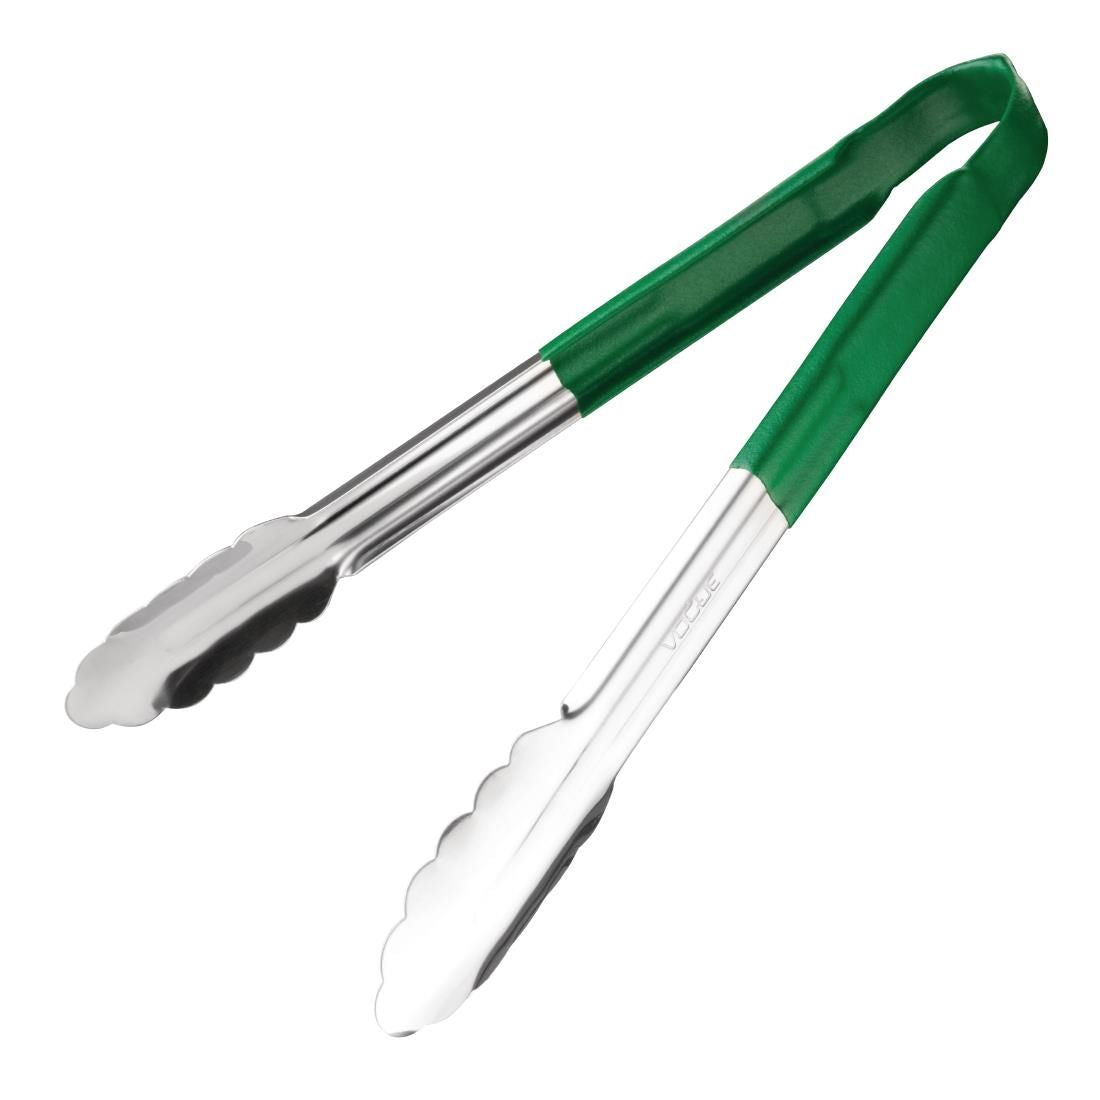 Vogue Colour Coded Green Serving Tongs 11"